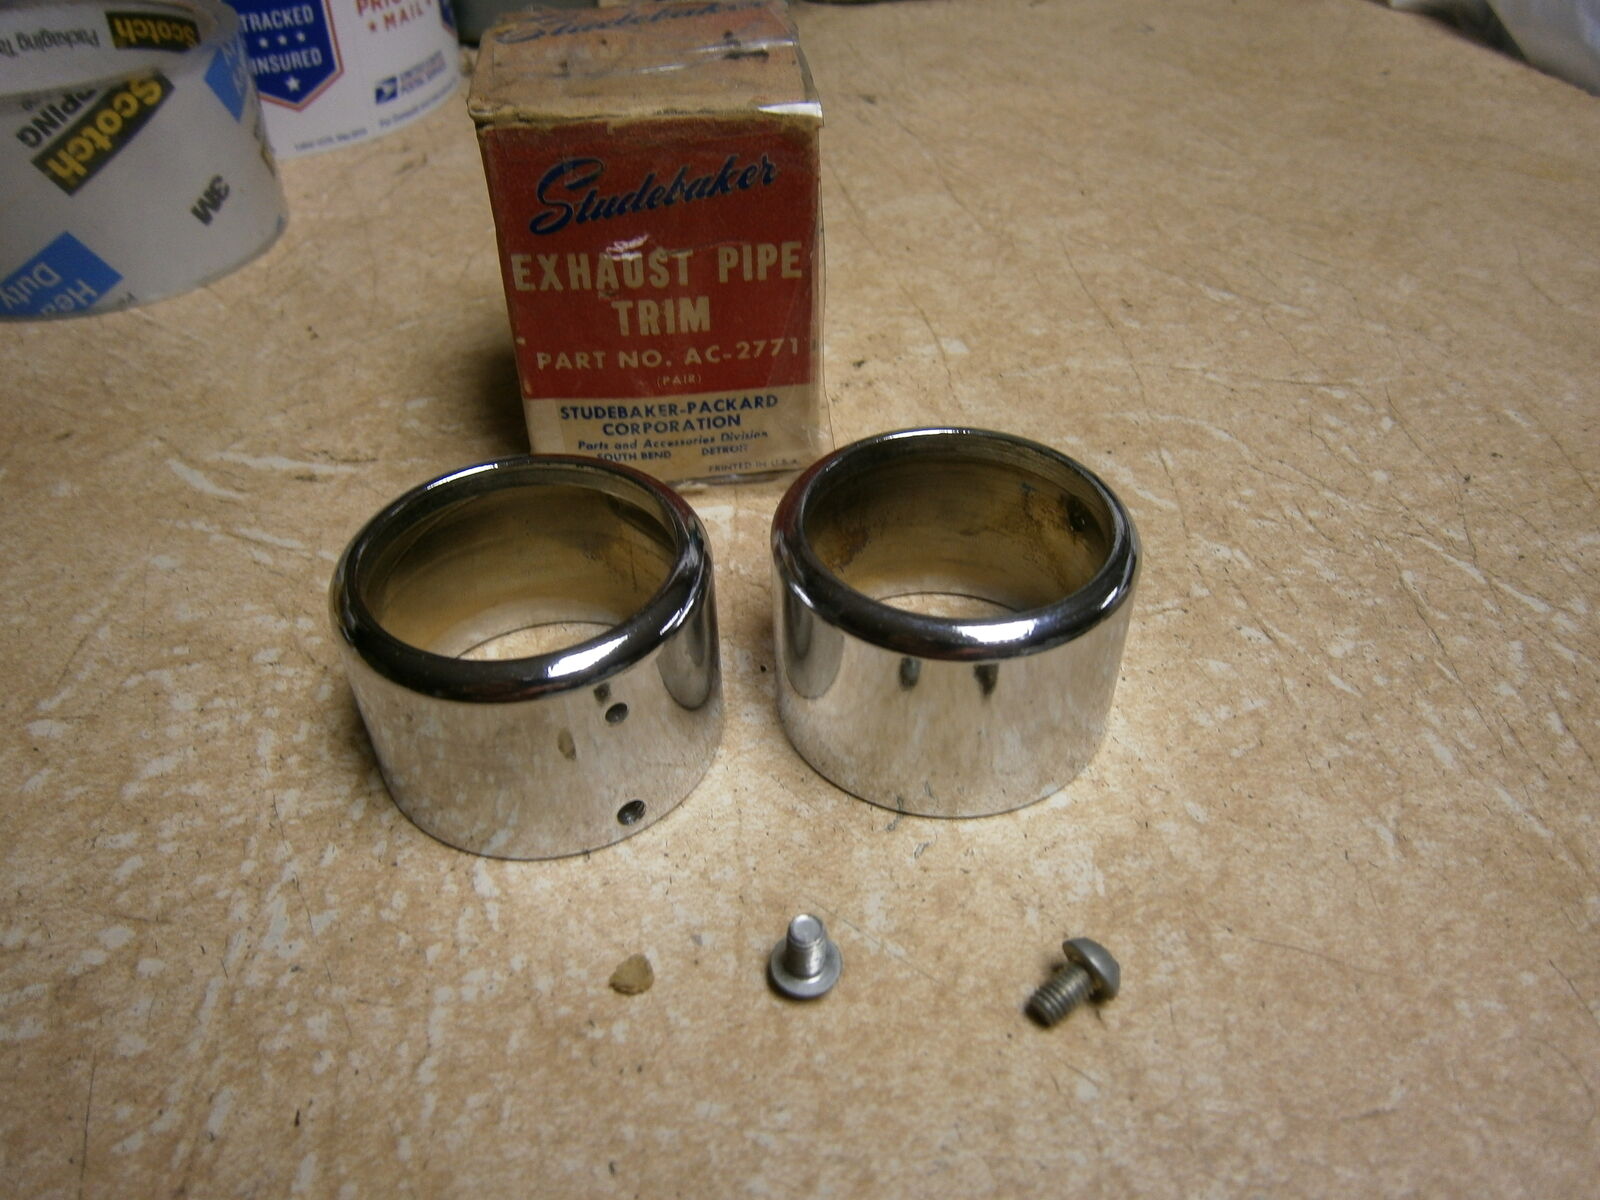 Studebaker AC-2771 Exhaust Tips for Exhaust Pipe 1956-? Pair